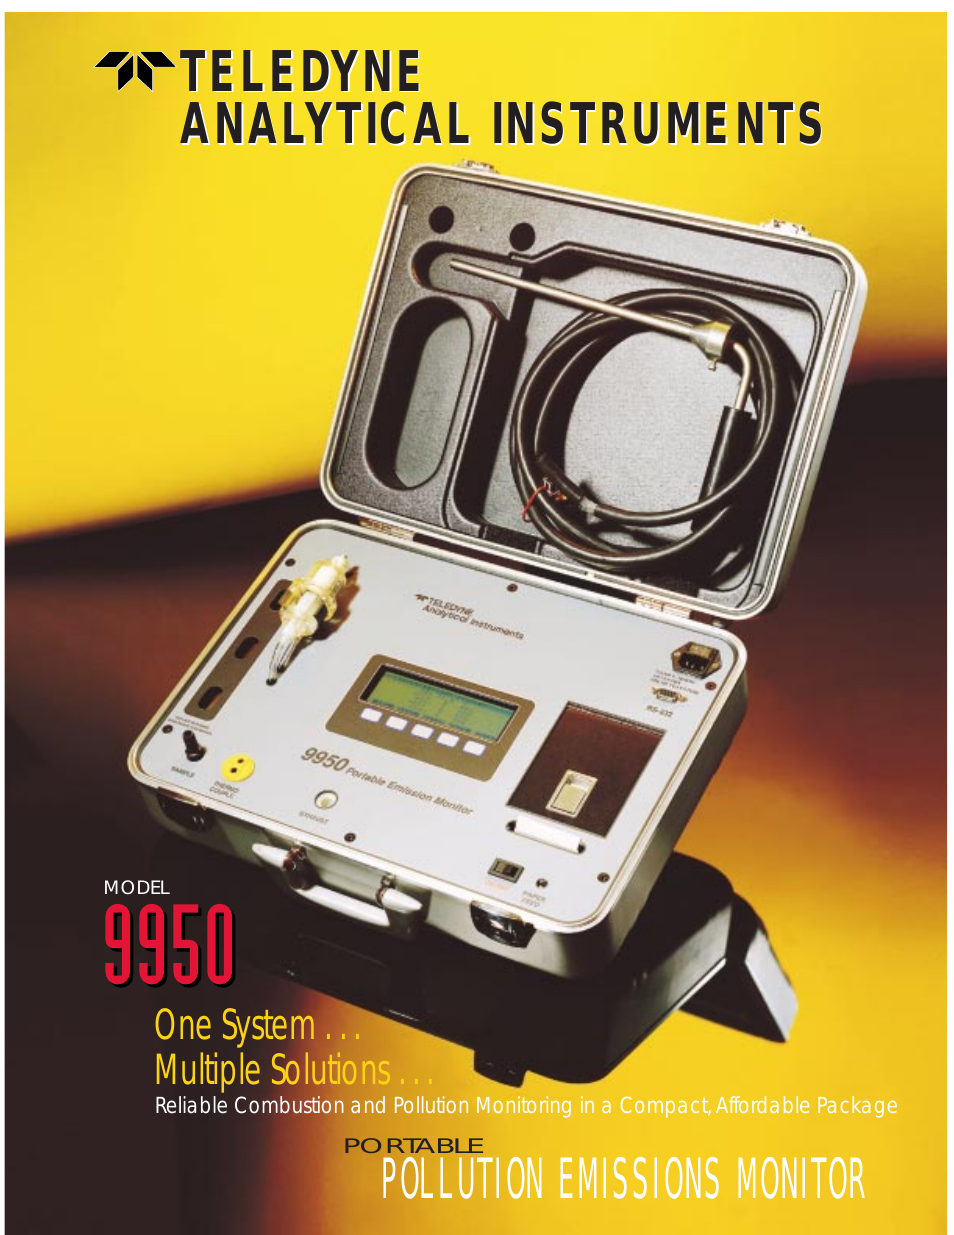 Portable Pollution Emissions Monitor 9950